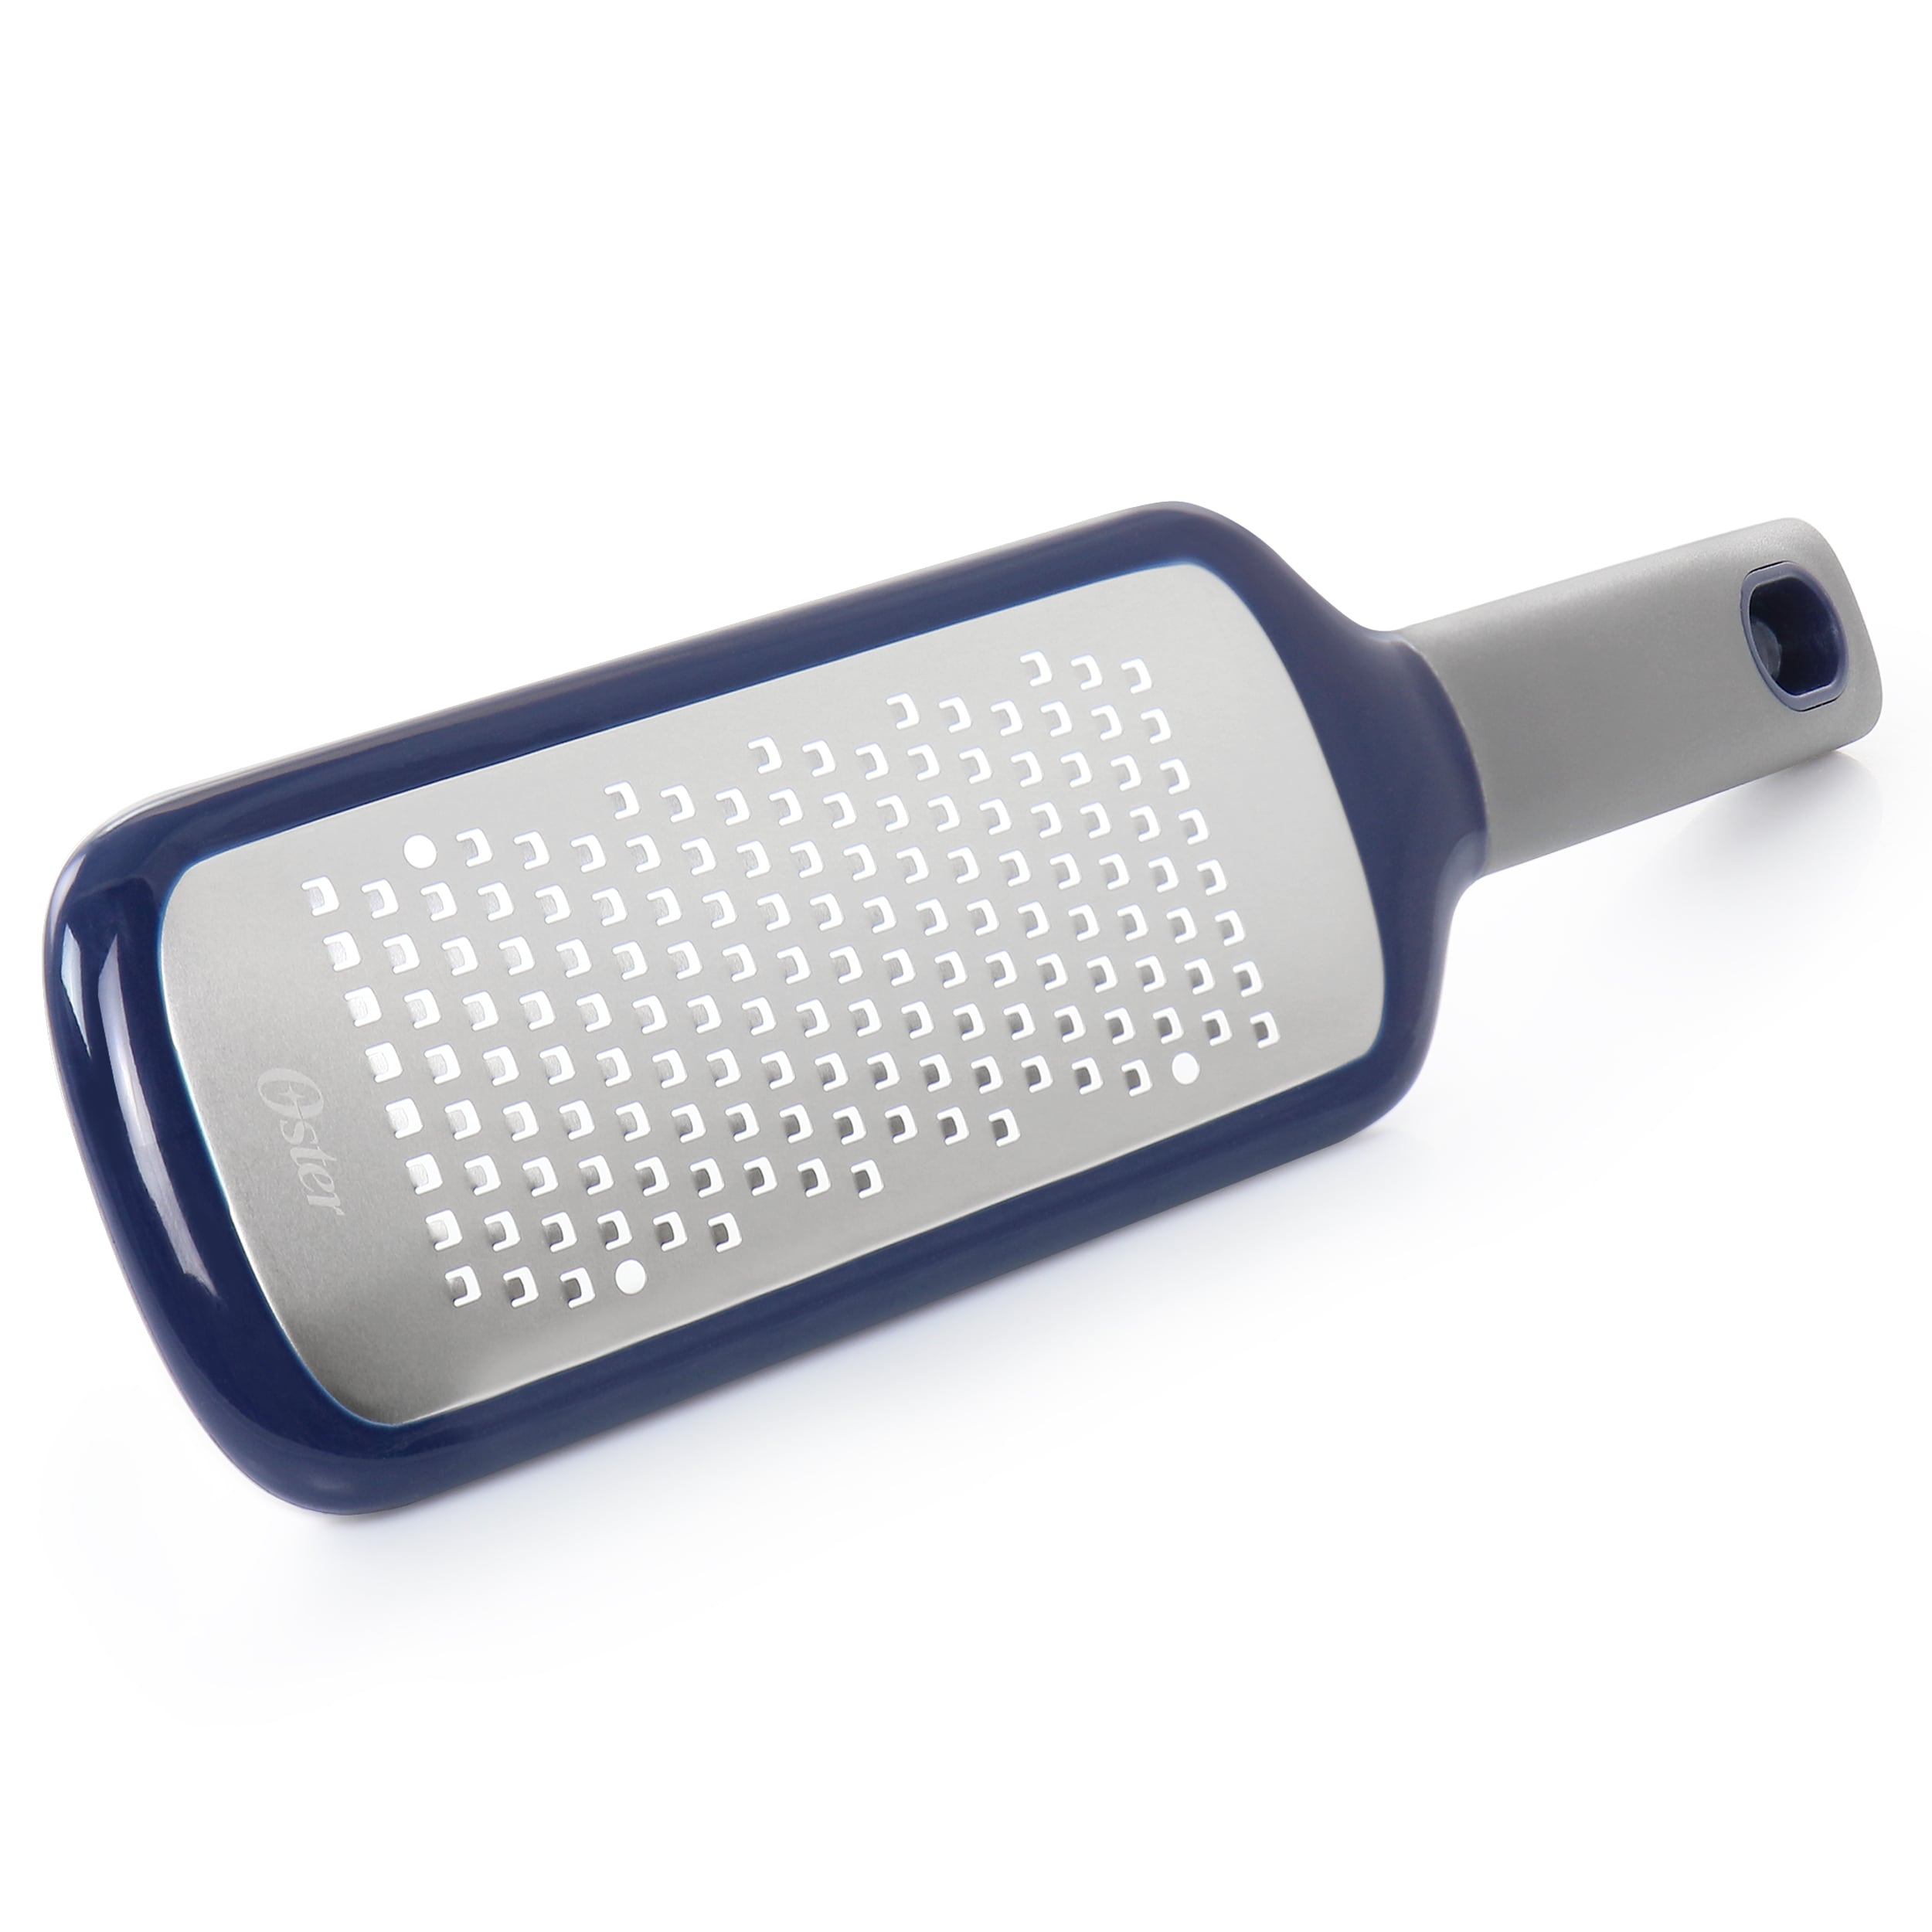  Better Houseware Safety Grater, Silver: Home & Kitchen